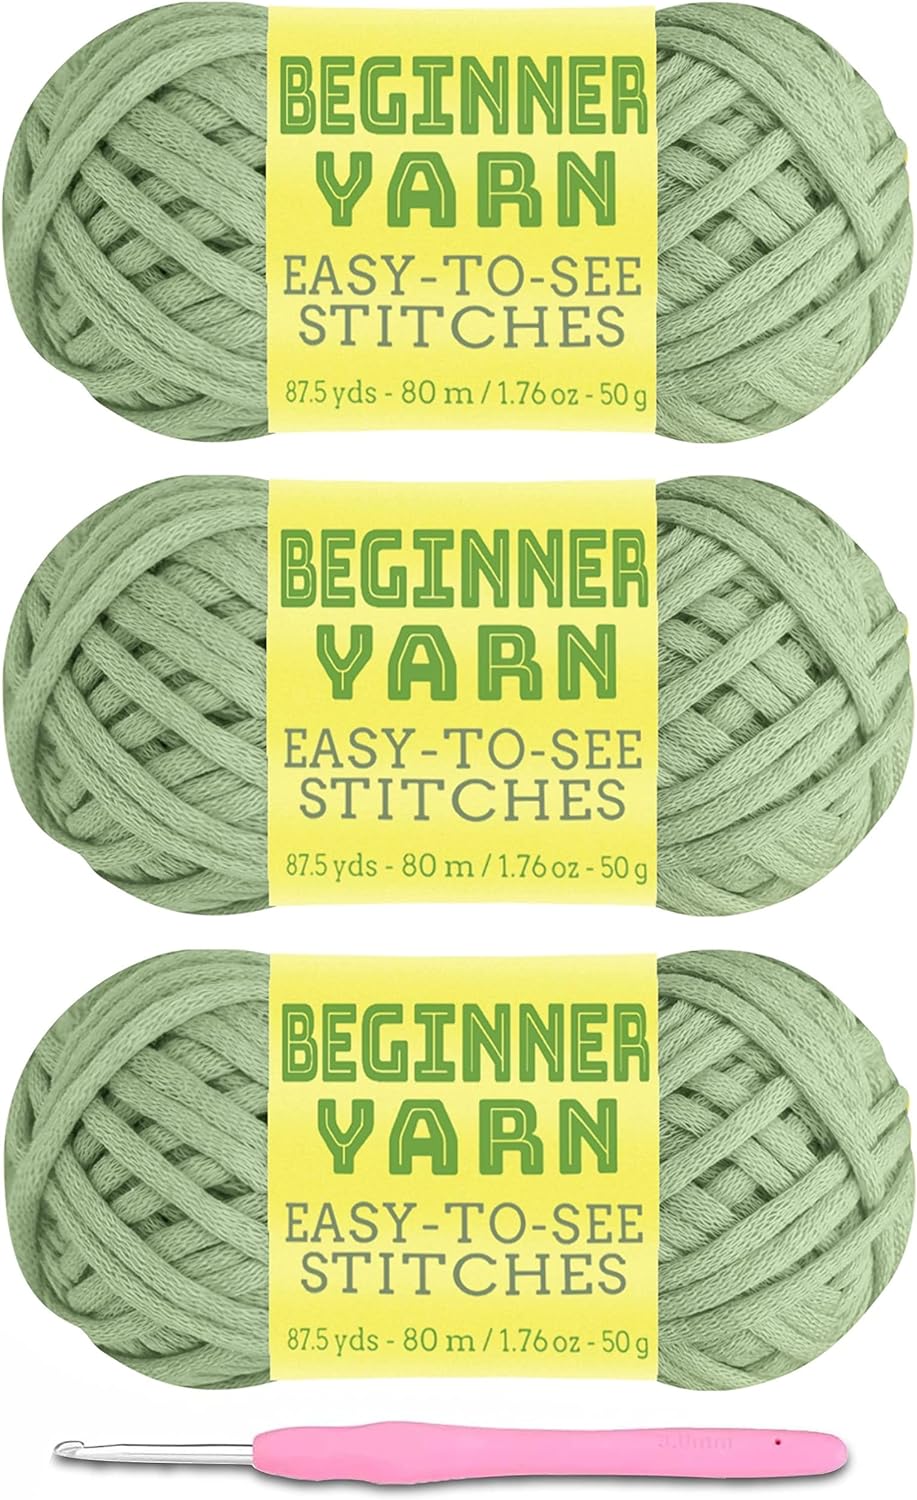 The Woobles Easy Peasy Yarn, Crochet & Knitting Yarn for Beginners with Easy-To